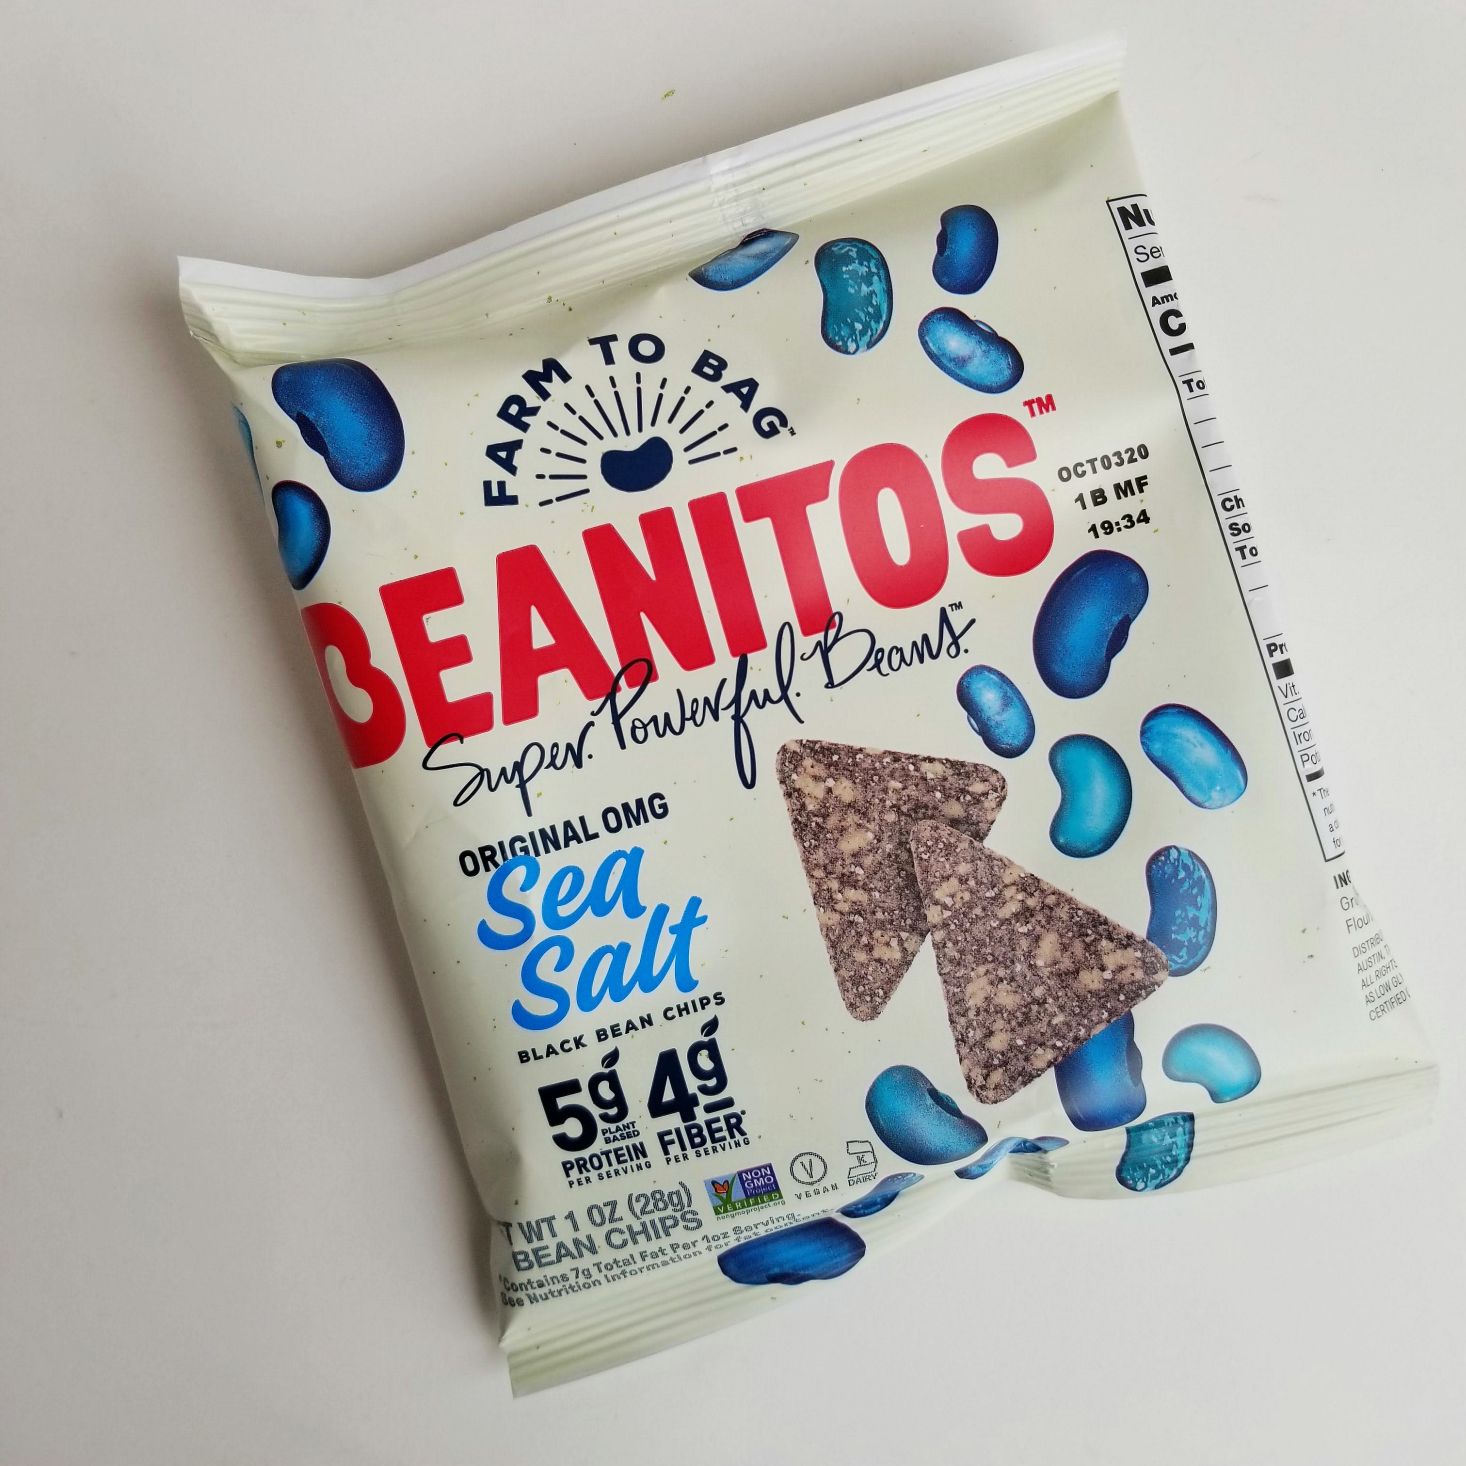 Snack Nation March 2020 beanitos